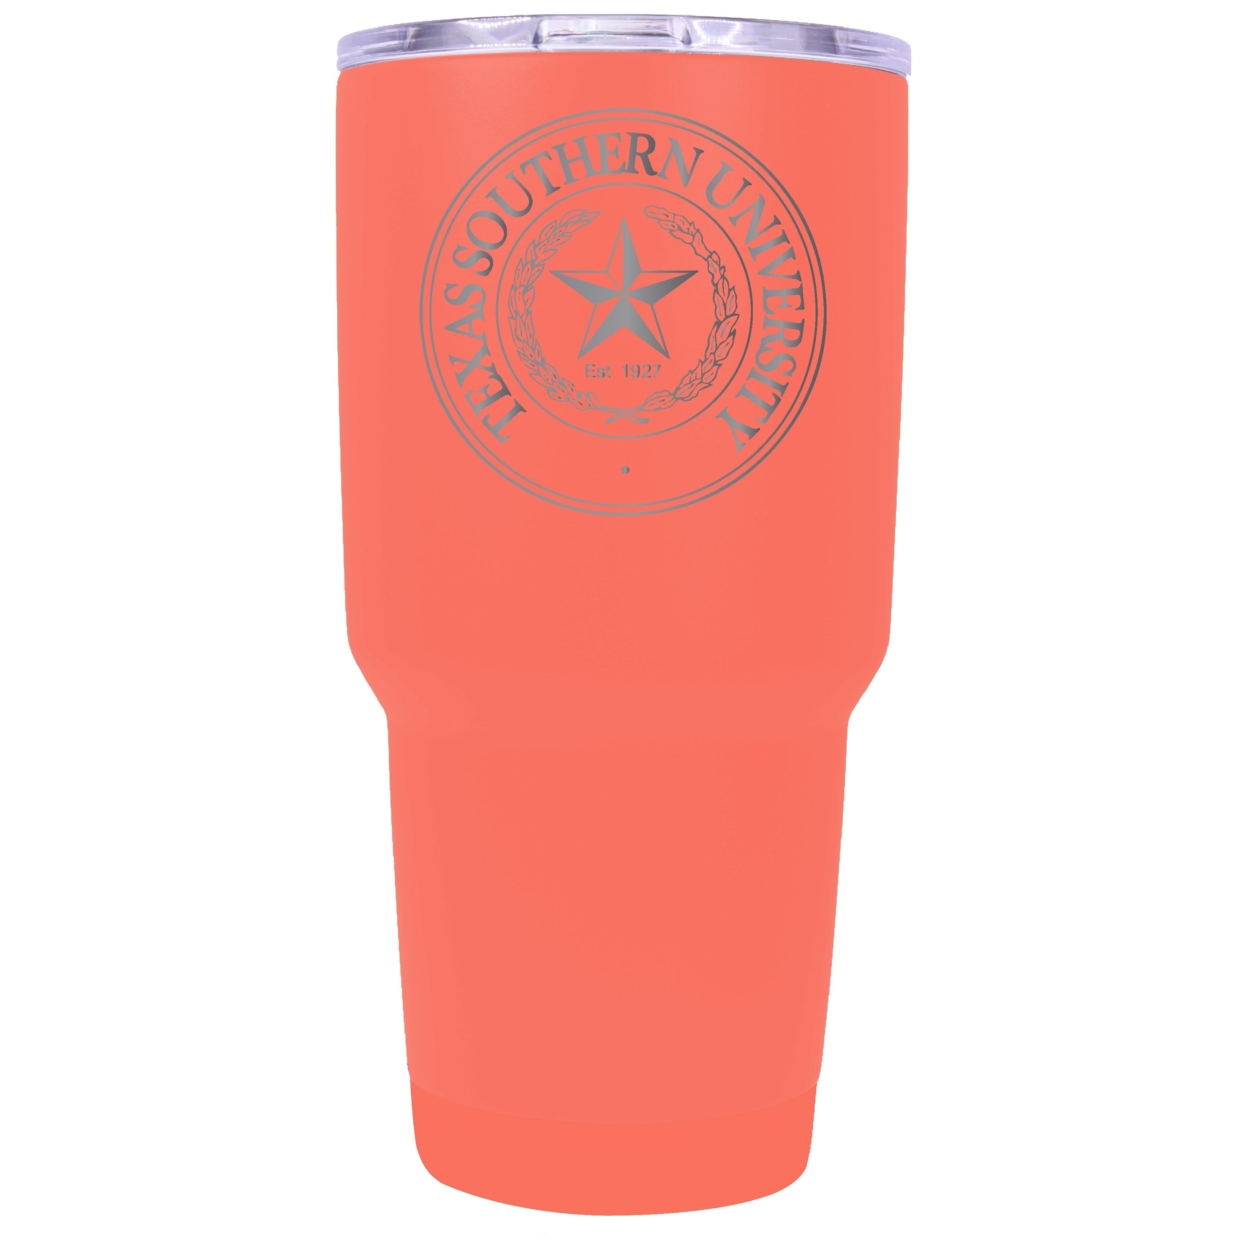 Texas Southern University 24 Oz Laser Engraved Stainless Steel Insulated Tumbler - Choose Your Color. - Seafoam